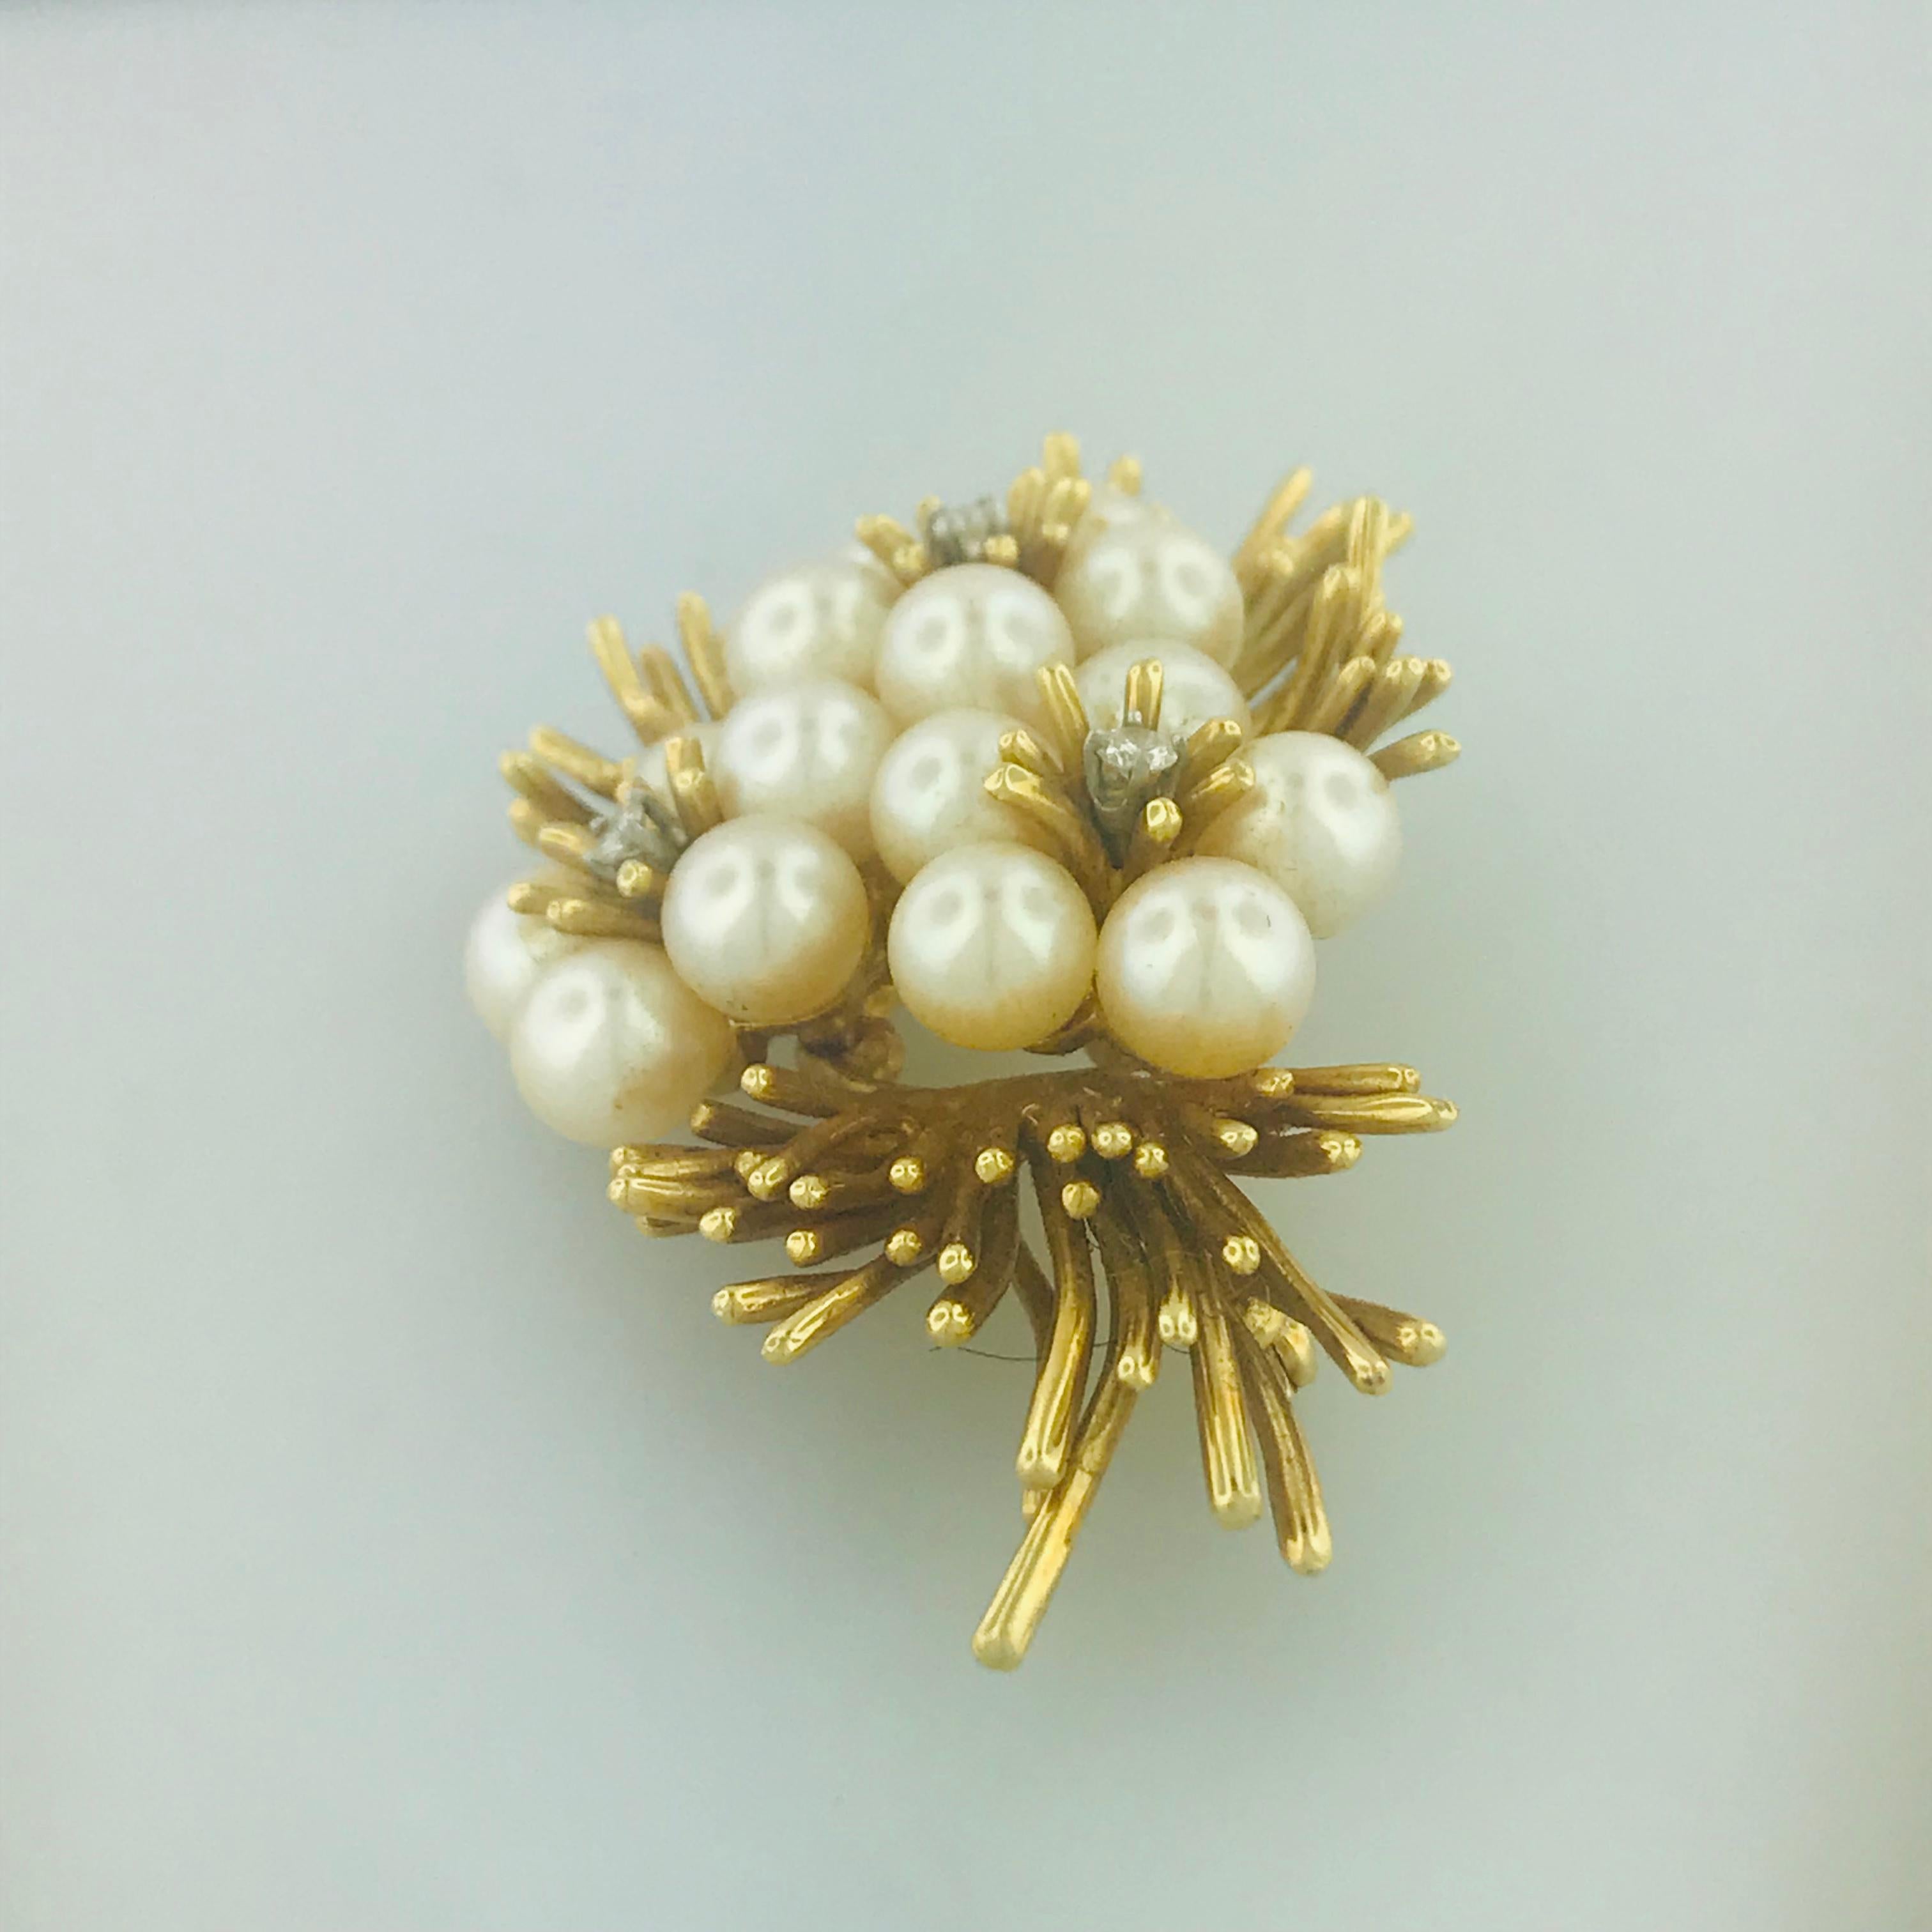 How fabulous is this vintage floral inspired brooch/pin? Made with three natural round brilliant diamonds and fifteen beautiful saltwater Akoya cultured pearls that have been adored and well taken care of. The rich 18 karat yellow gold compliments